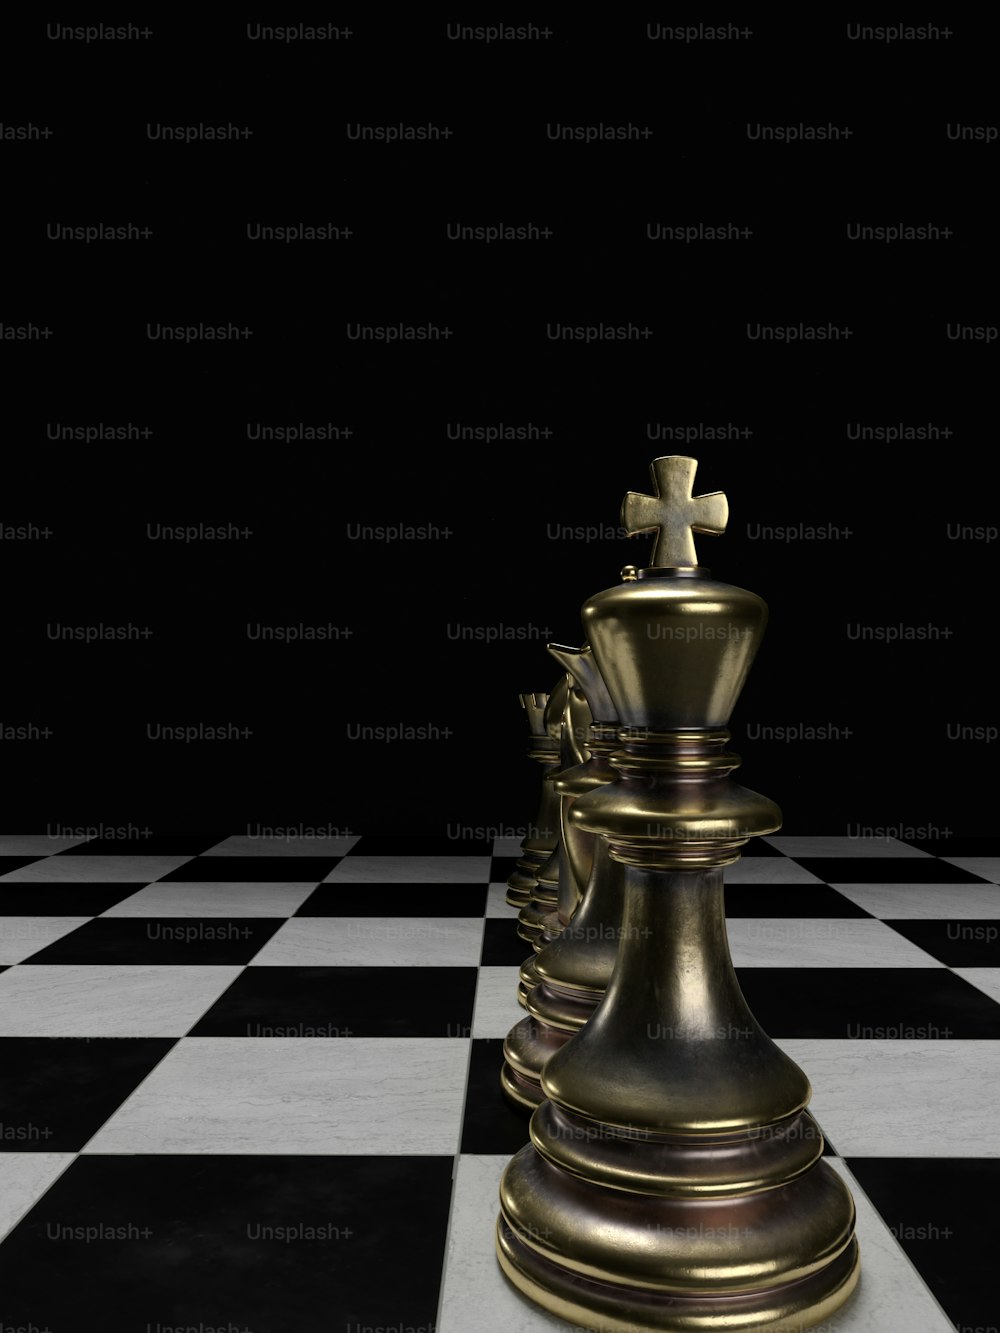 a golden chess piece on a black and white checkered floor